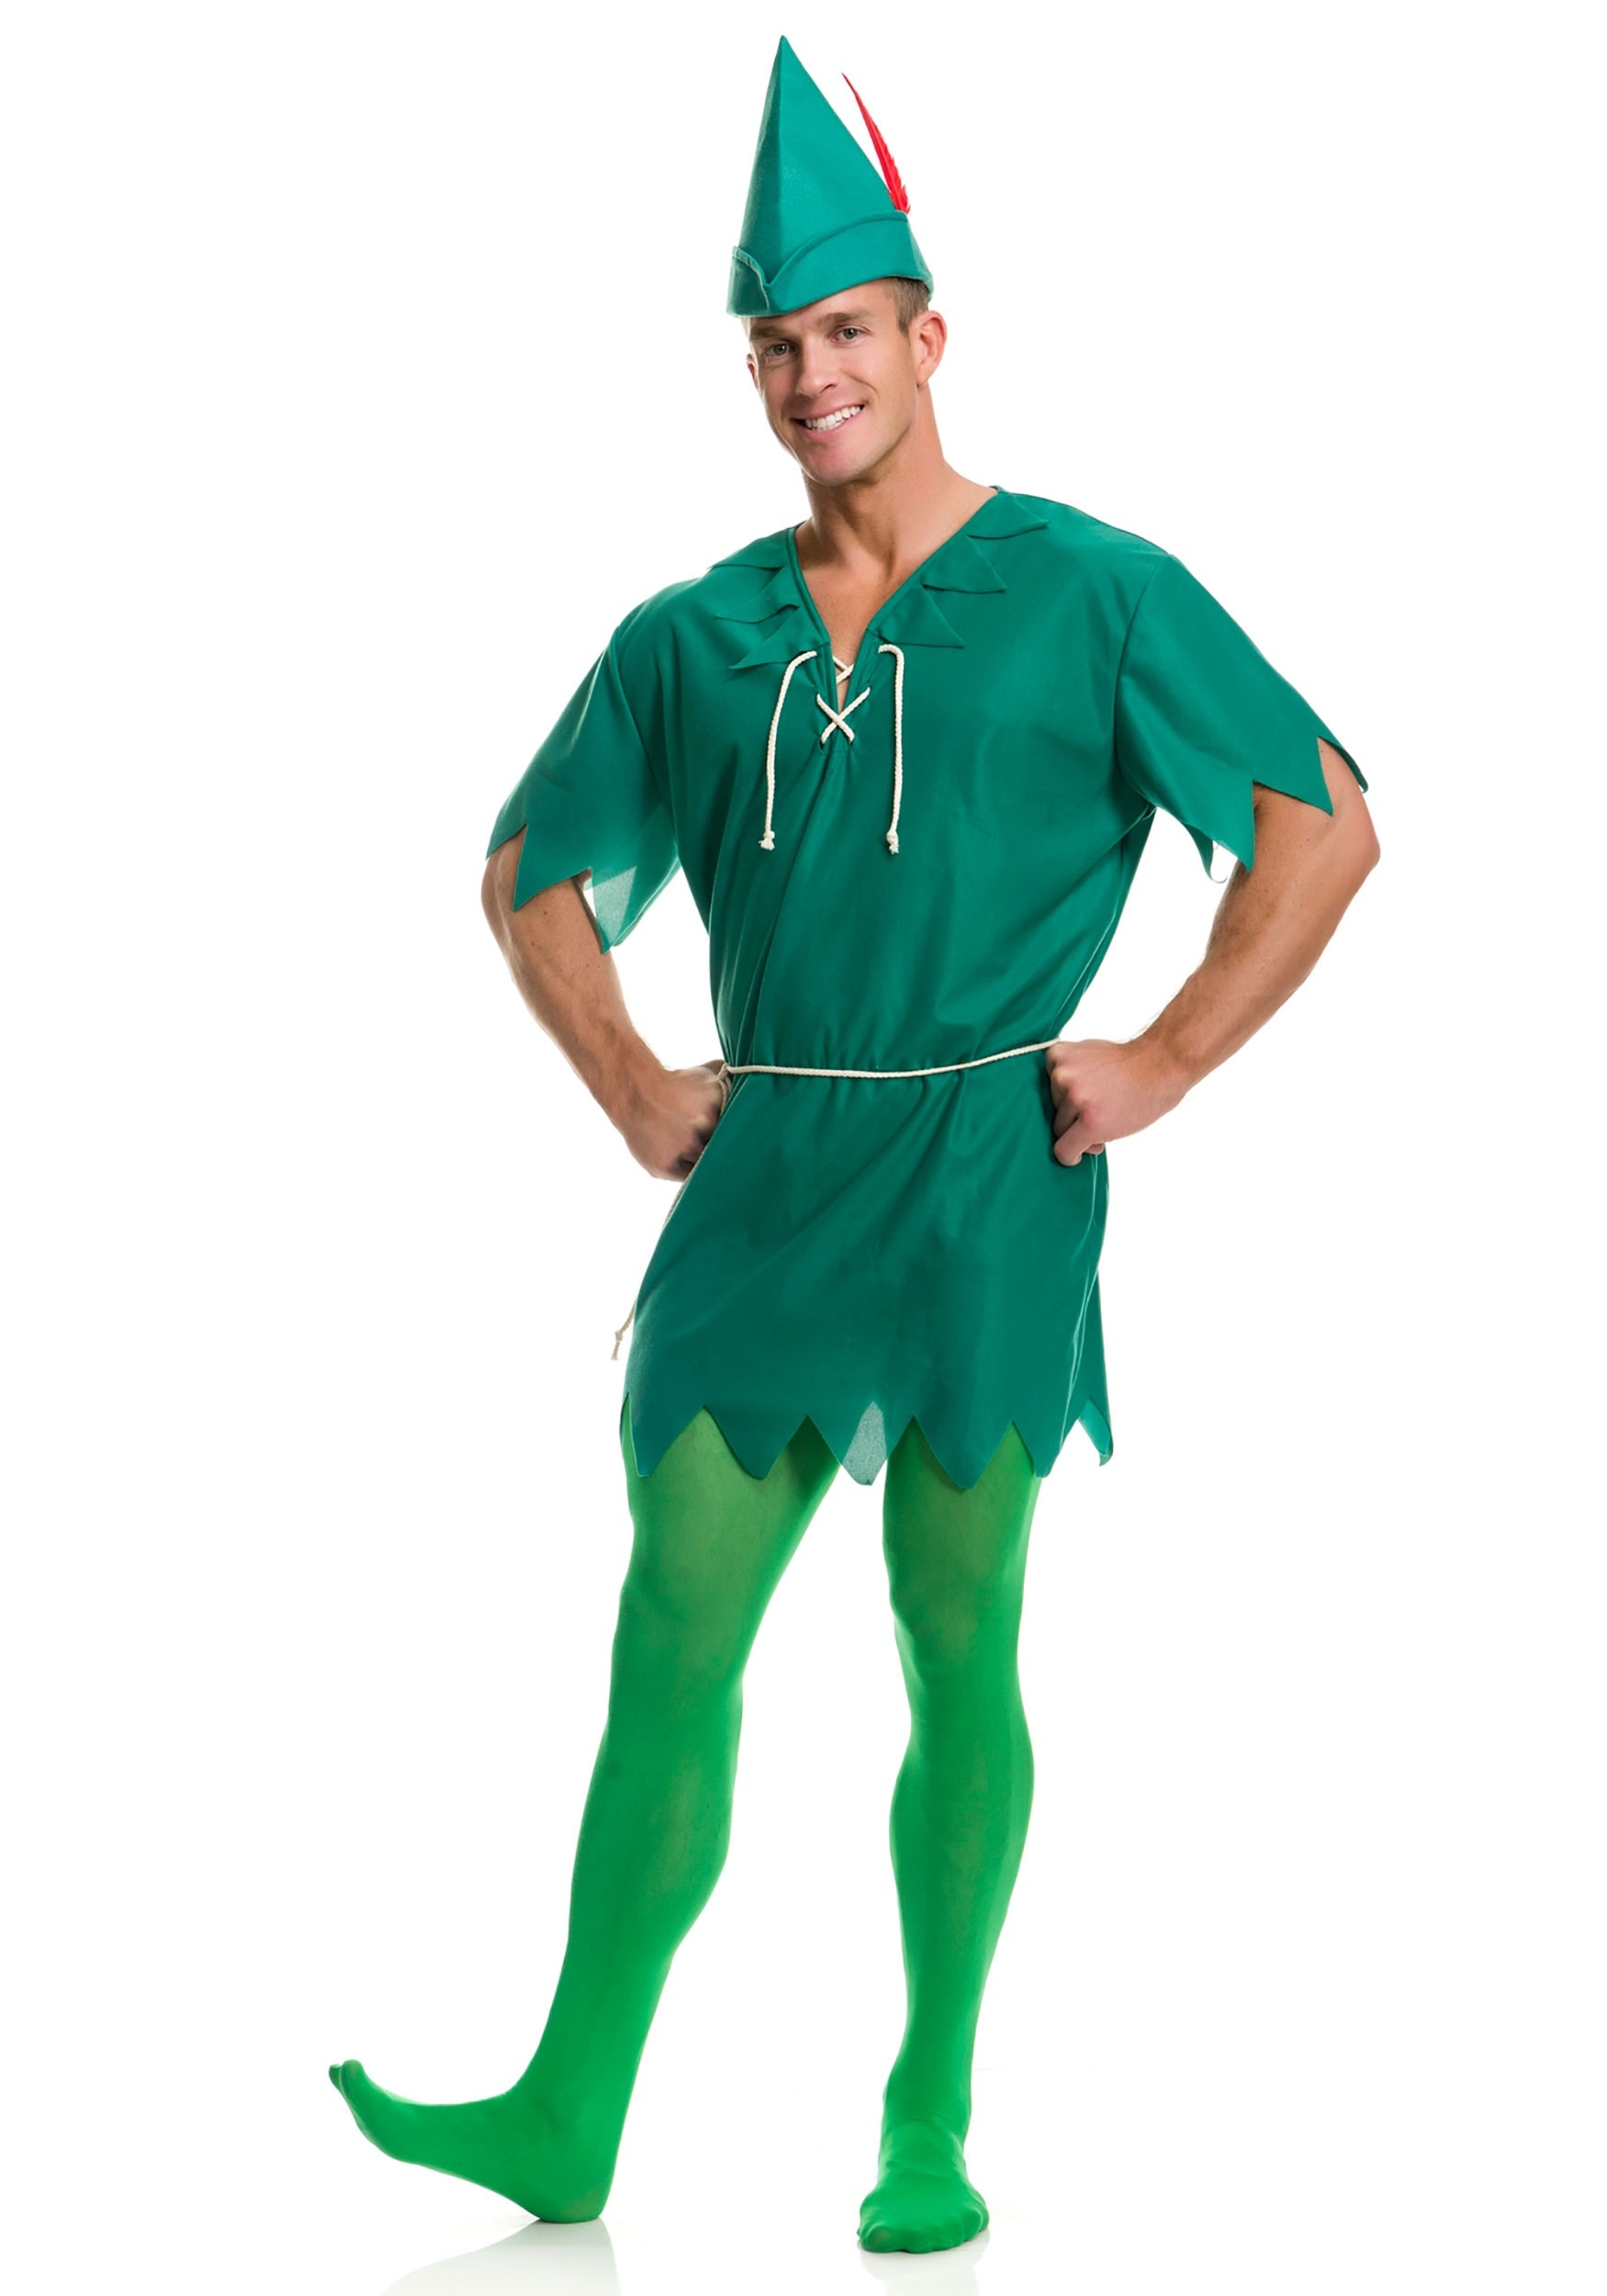 Peter Pan Adult Costume (X-Large 40-42) - image 1 of 2